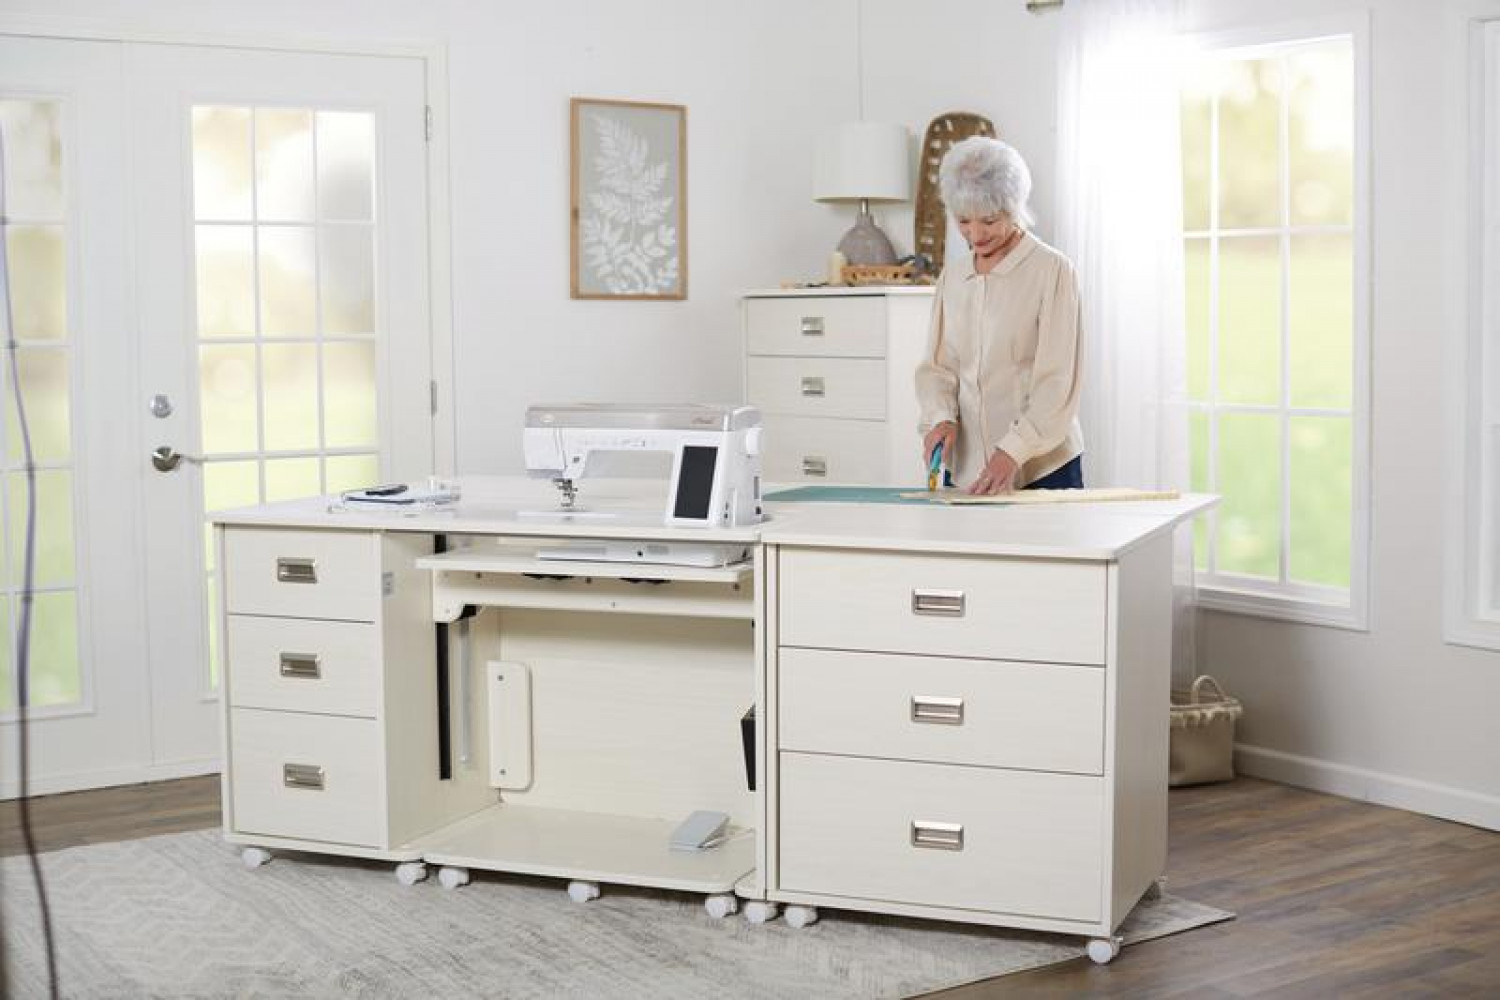 The Koala Artistry Drawer Center with Three Drawer Caddy